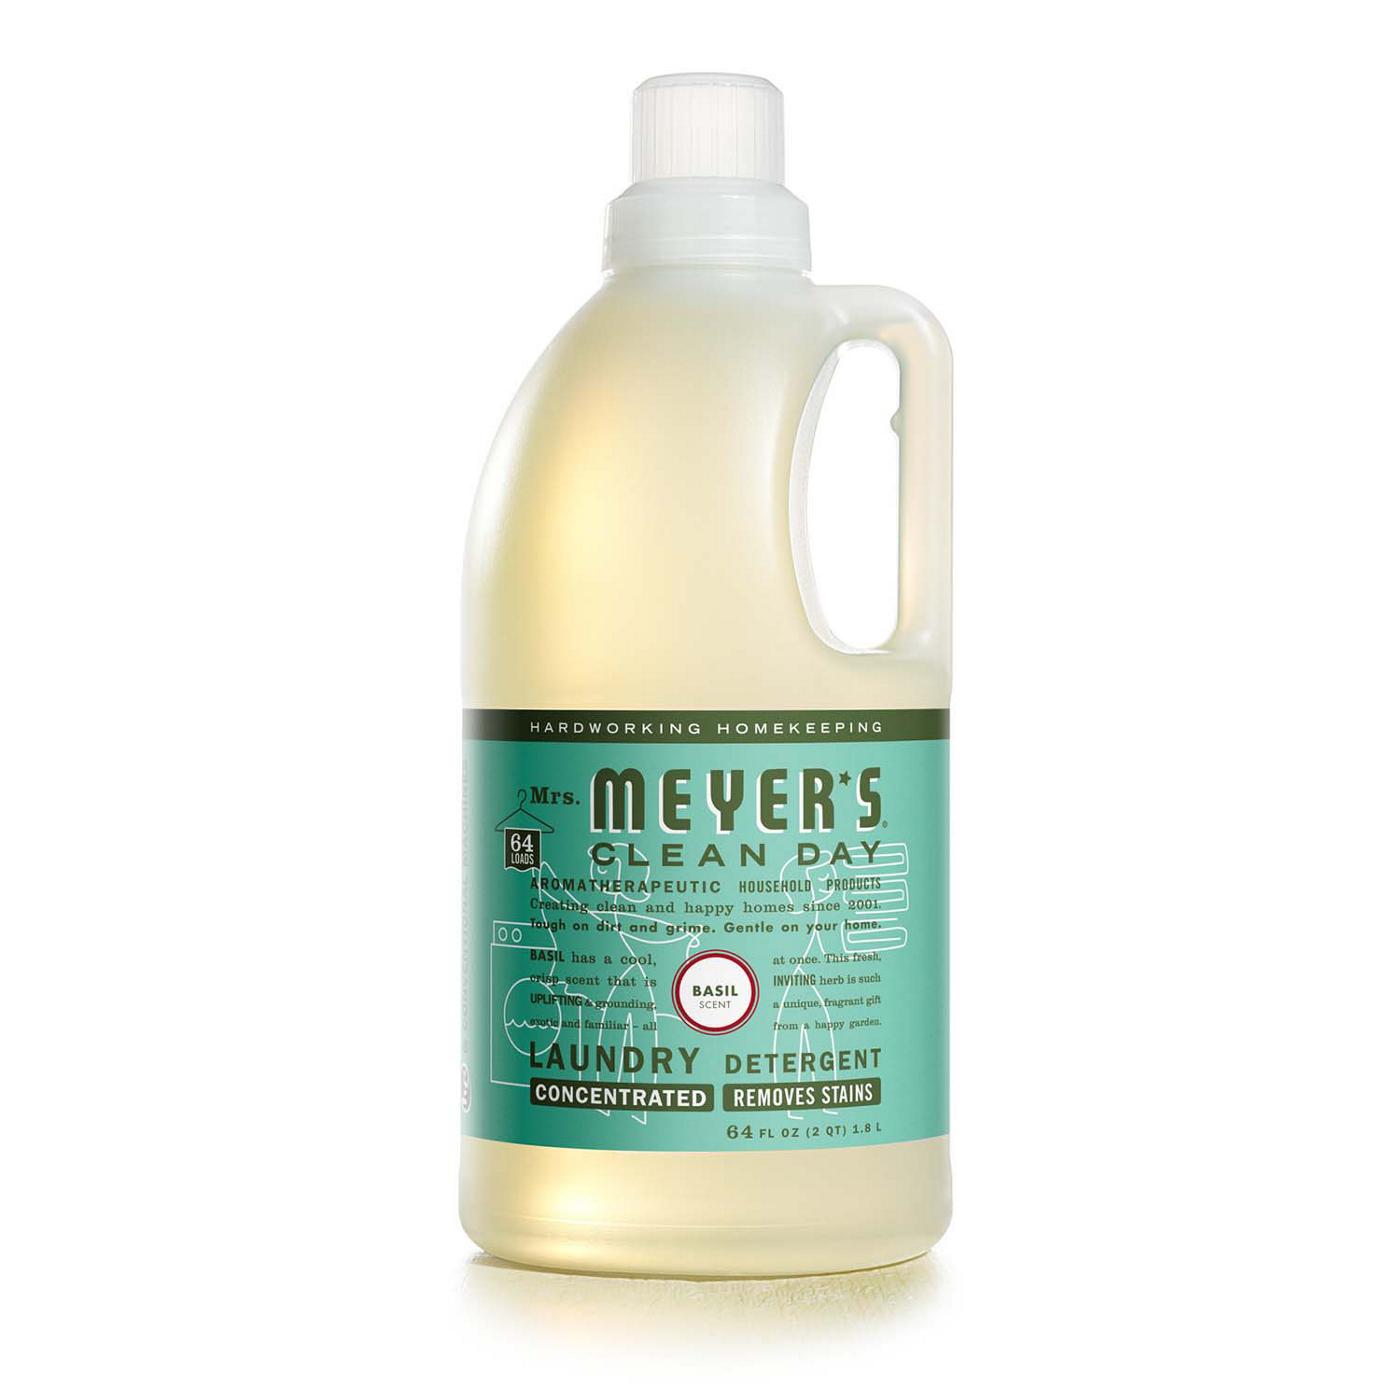 Mrs. Meyer's Clean Day Basil Scent Concentrated Laundry Detergent, 64 Loads; image 1 of 5